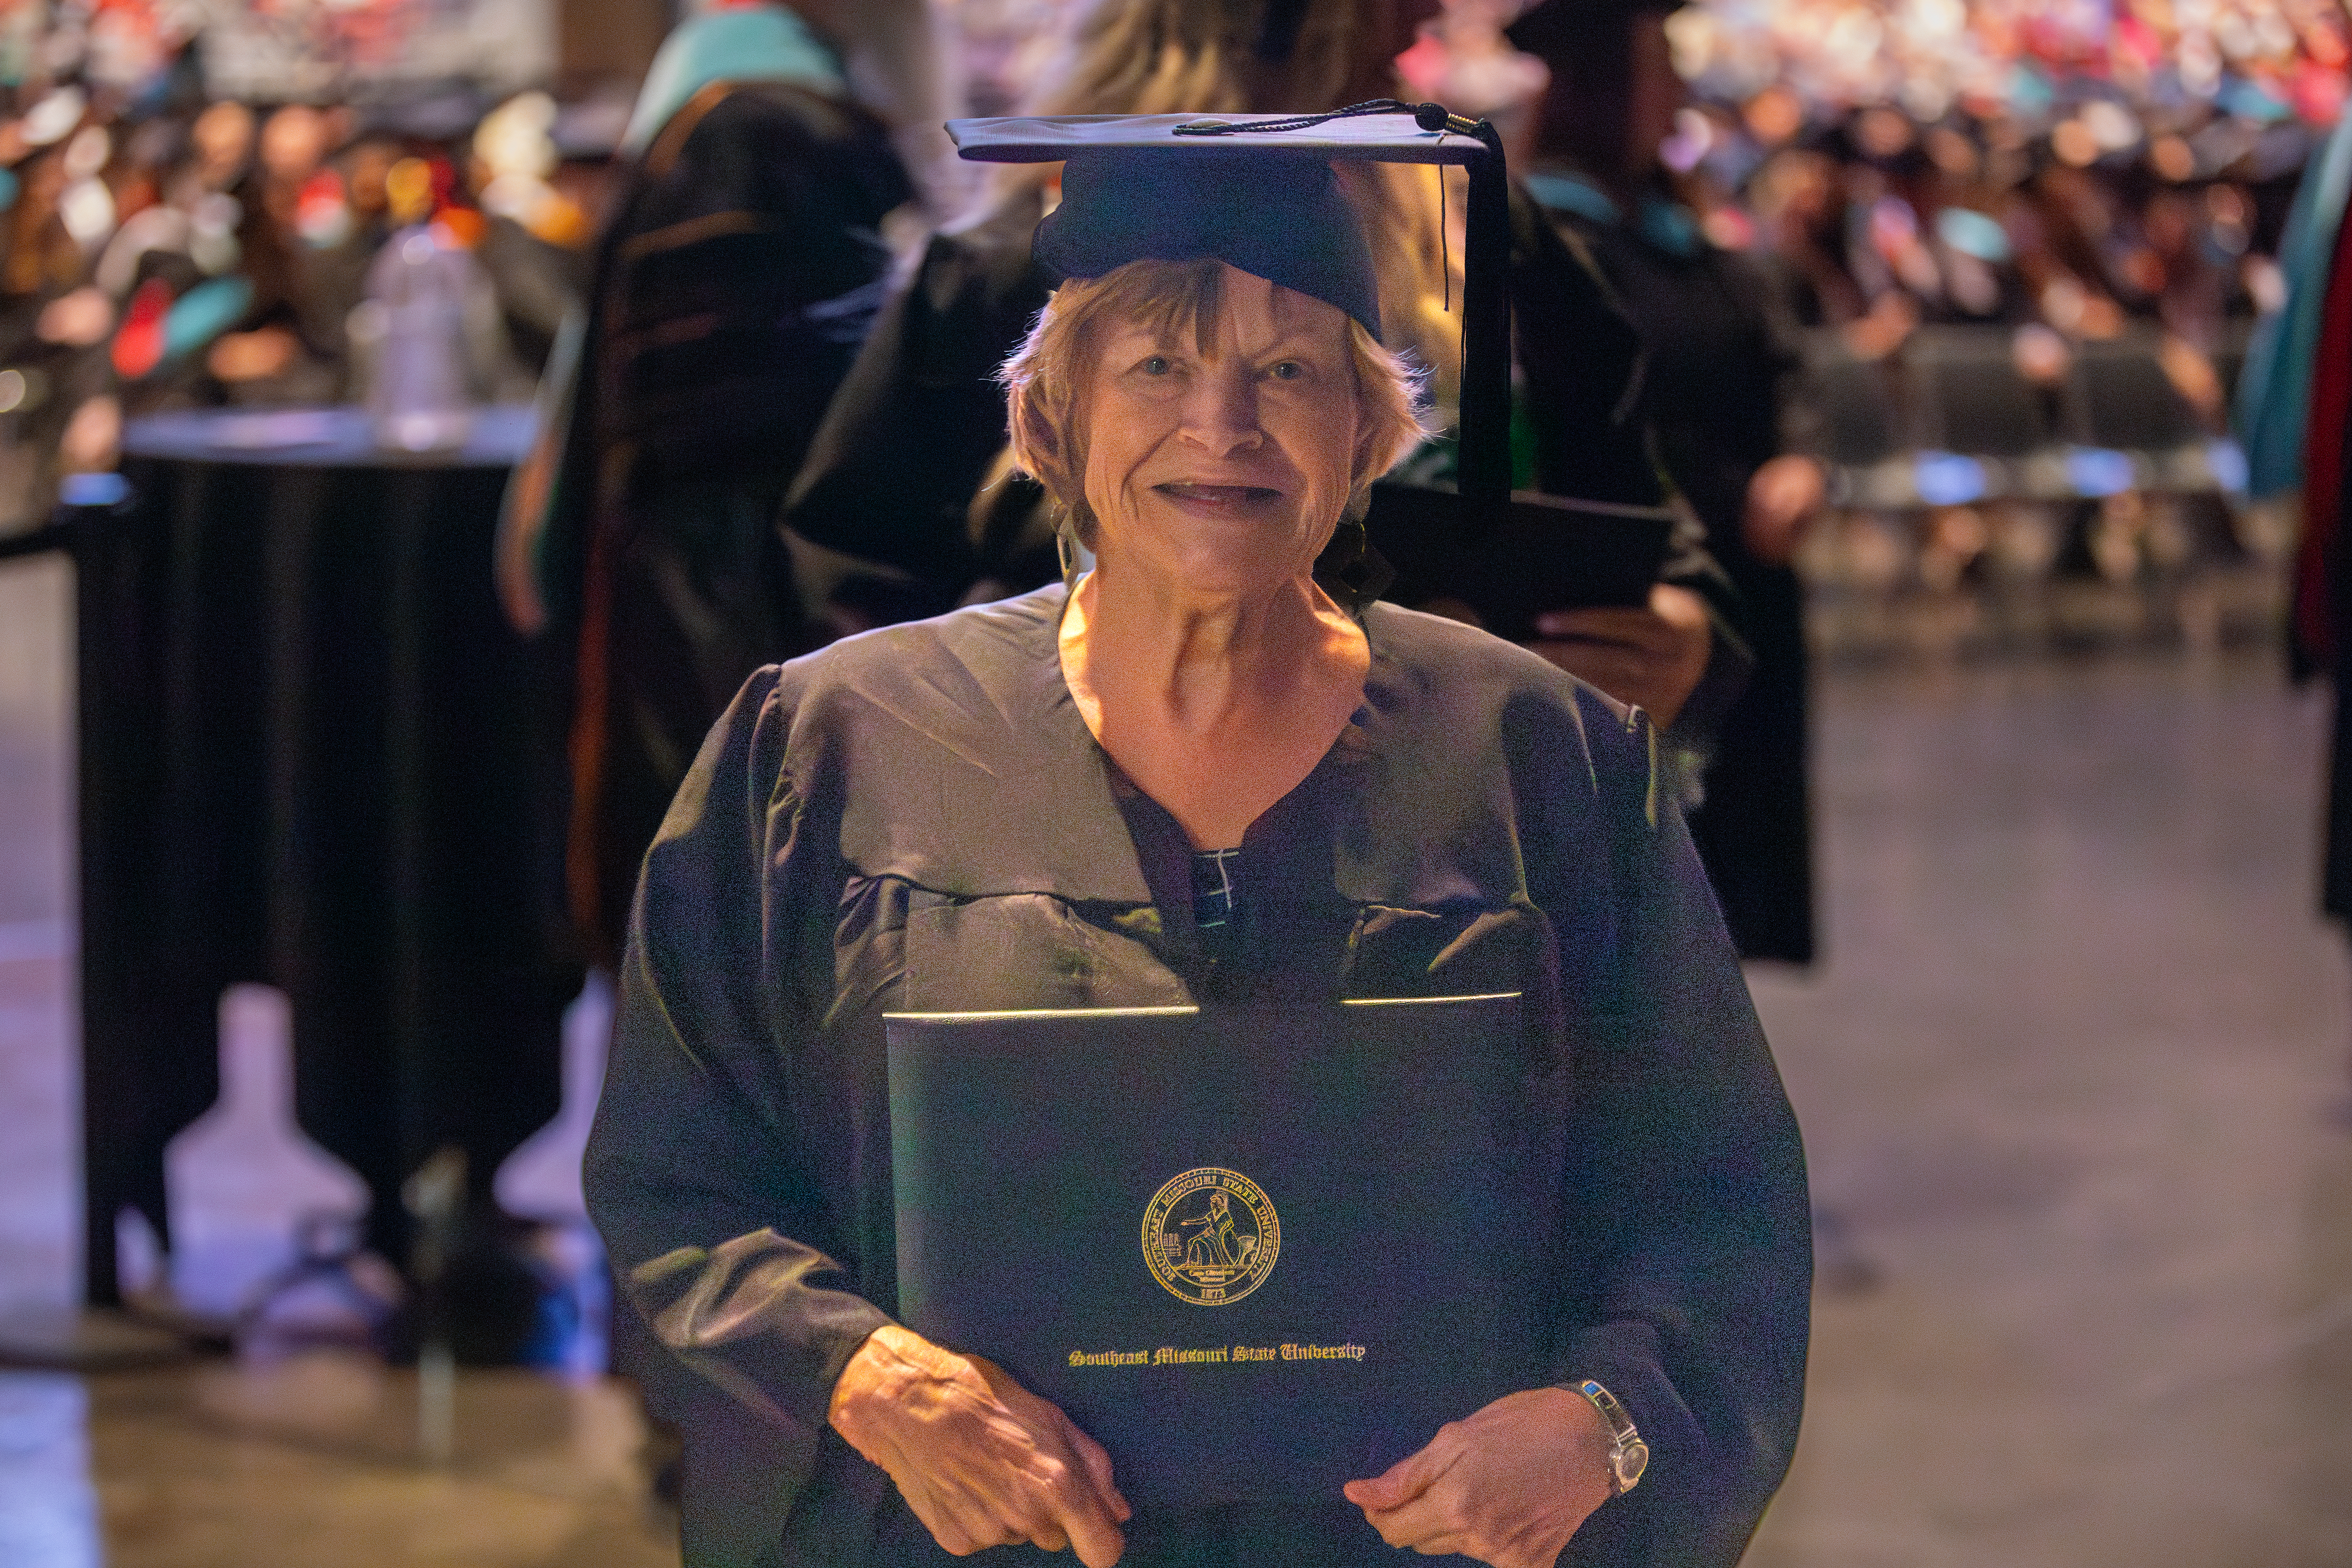 Shirley Bentley with her diploma at graduation.